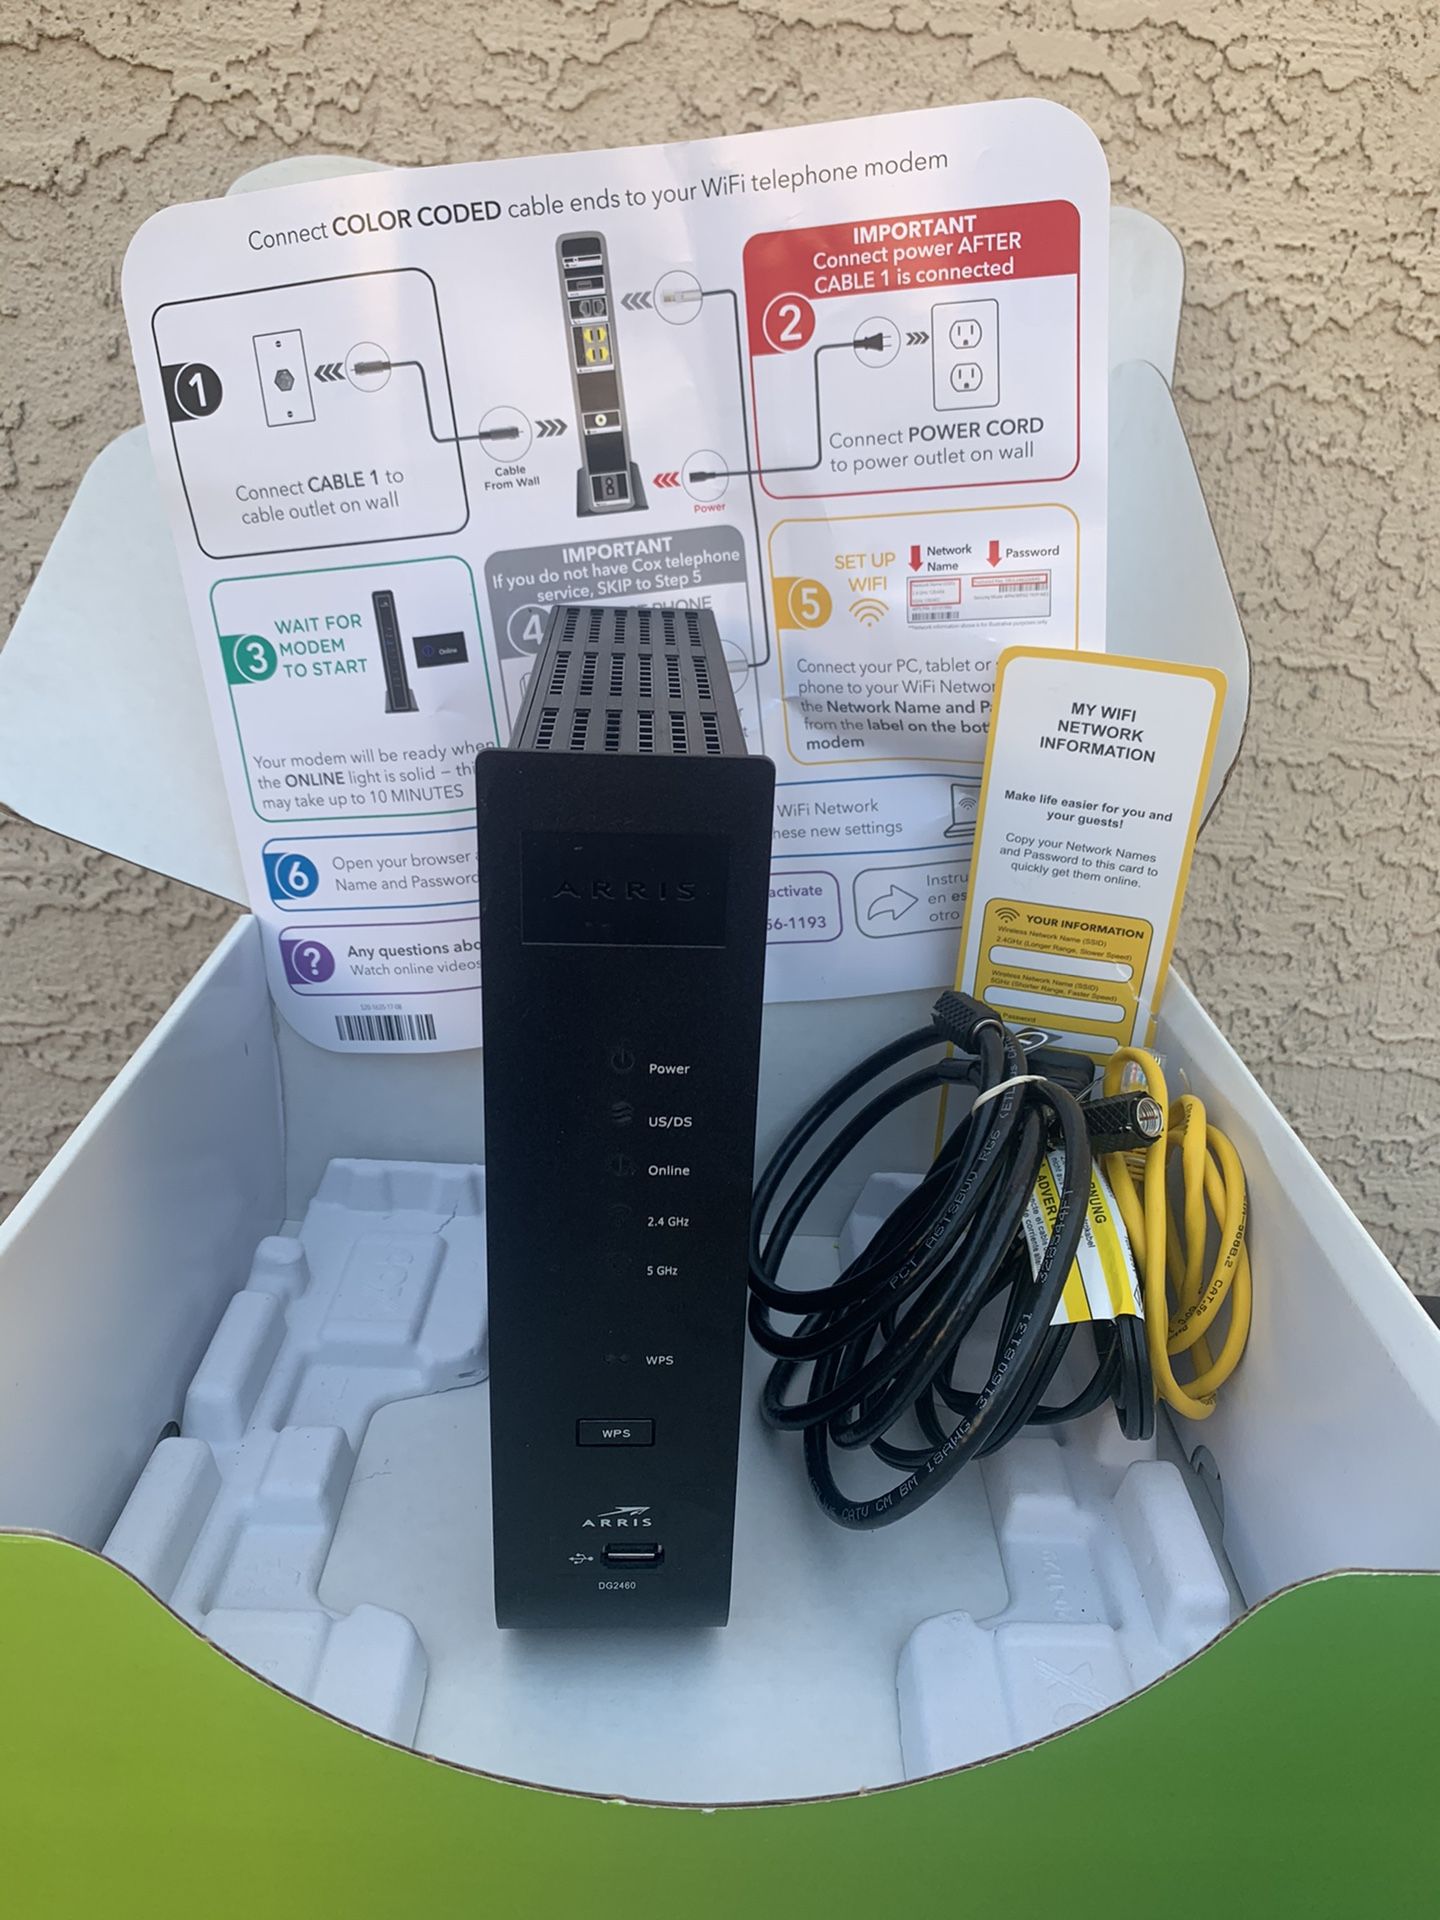 Arris SURFboard cable modem WIFI router